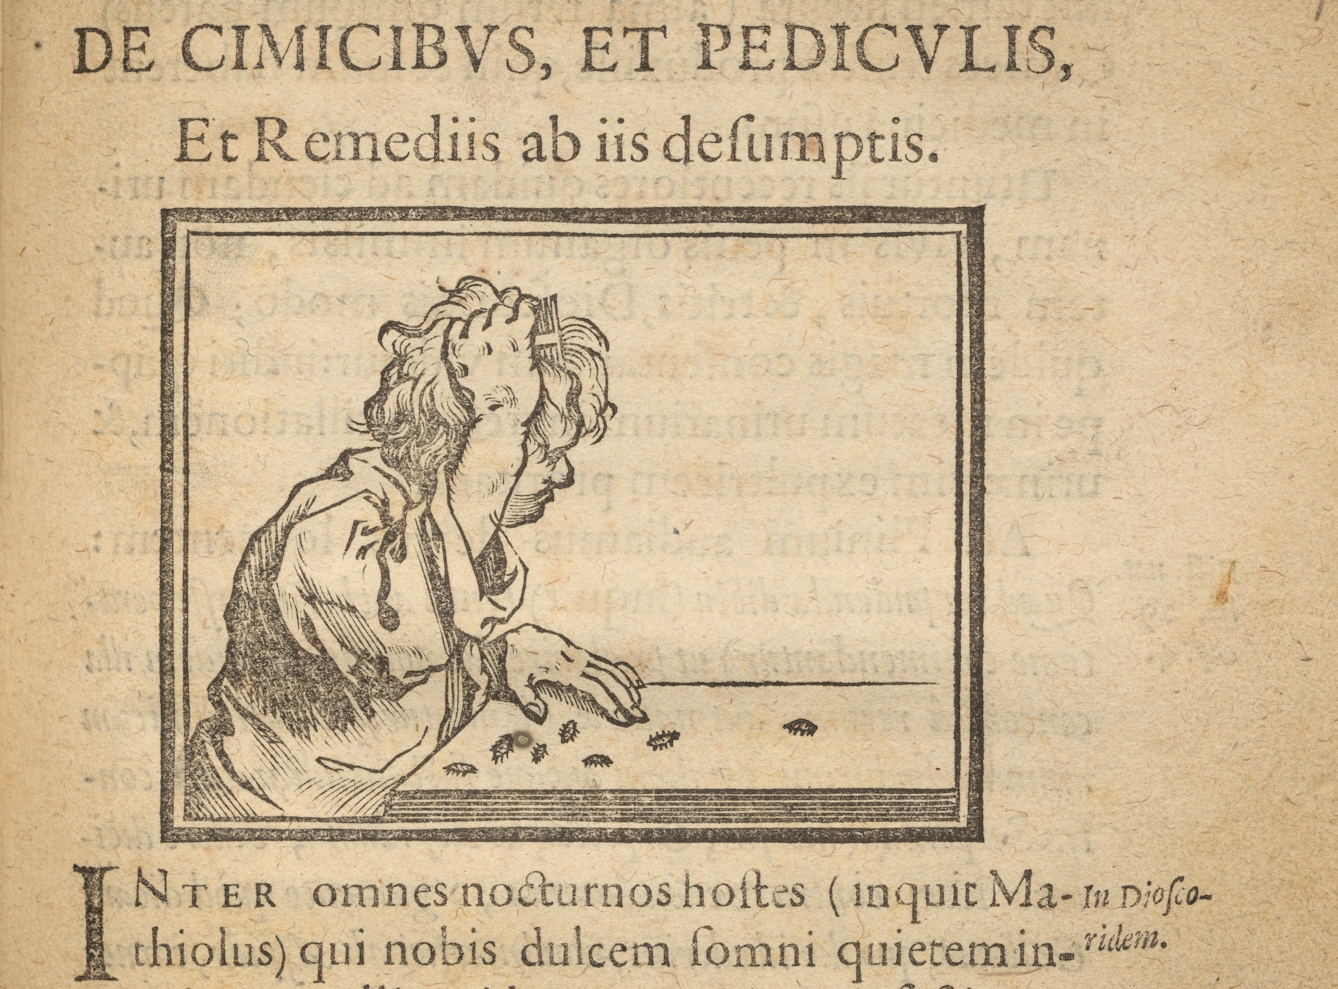 Photographic detail of an illustration on the page of an early printed book from 1638, showing a man combing lice out of his hair.